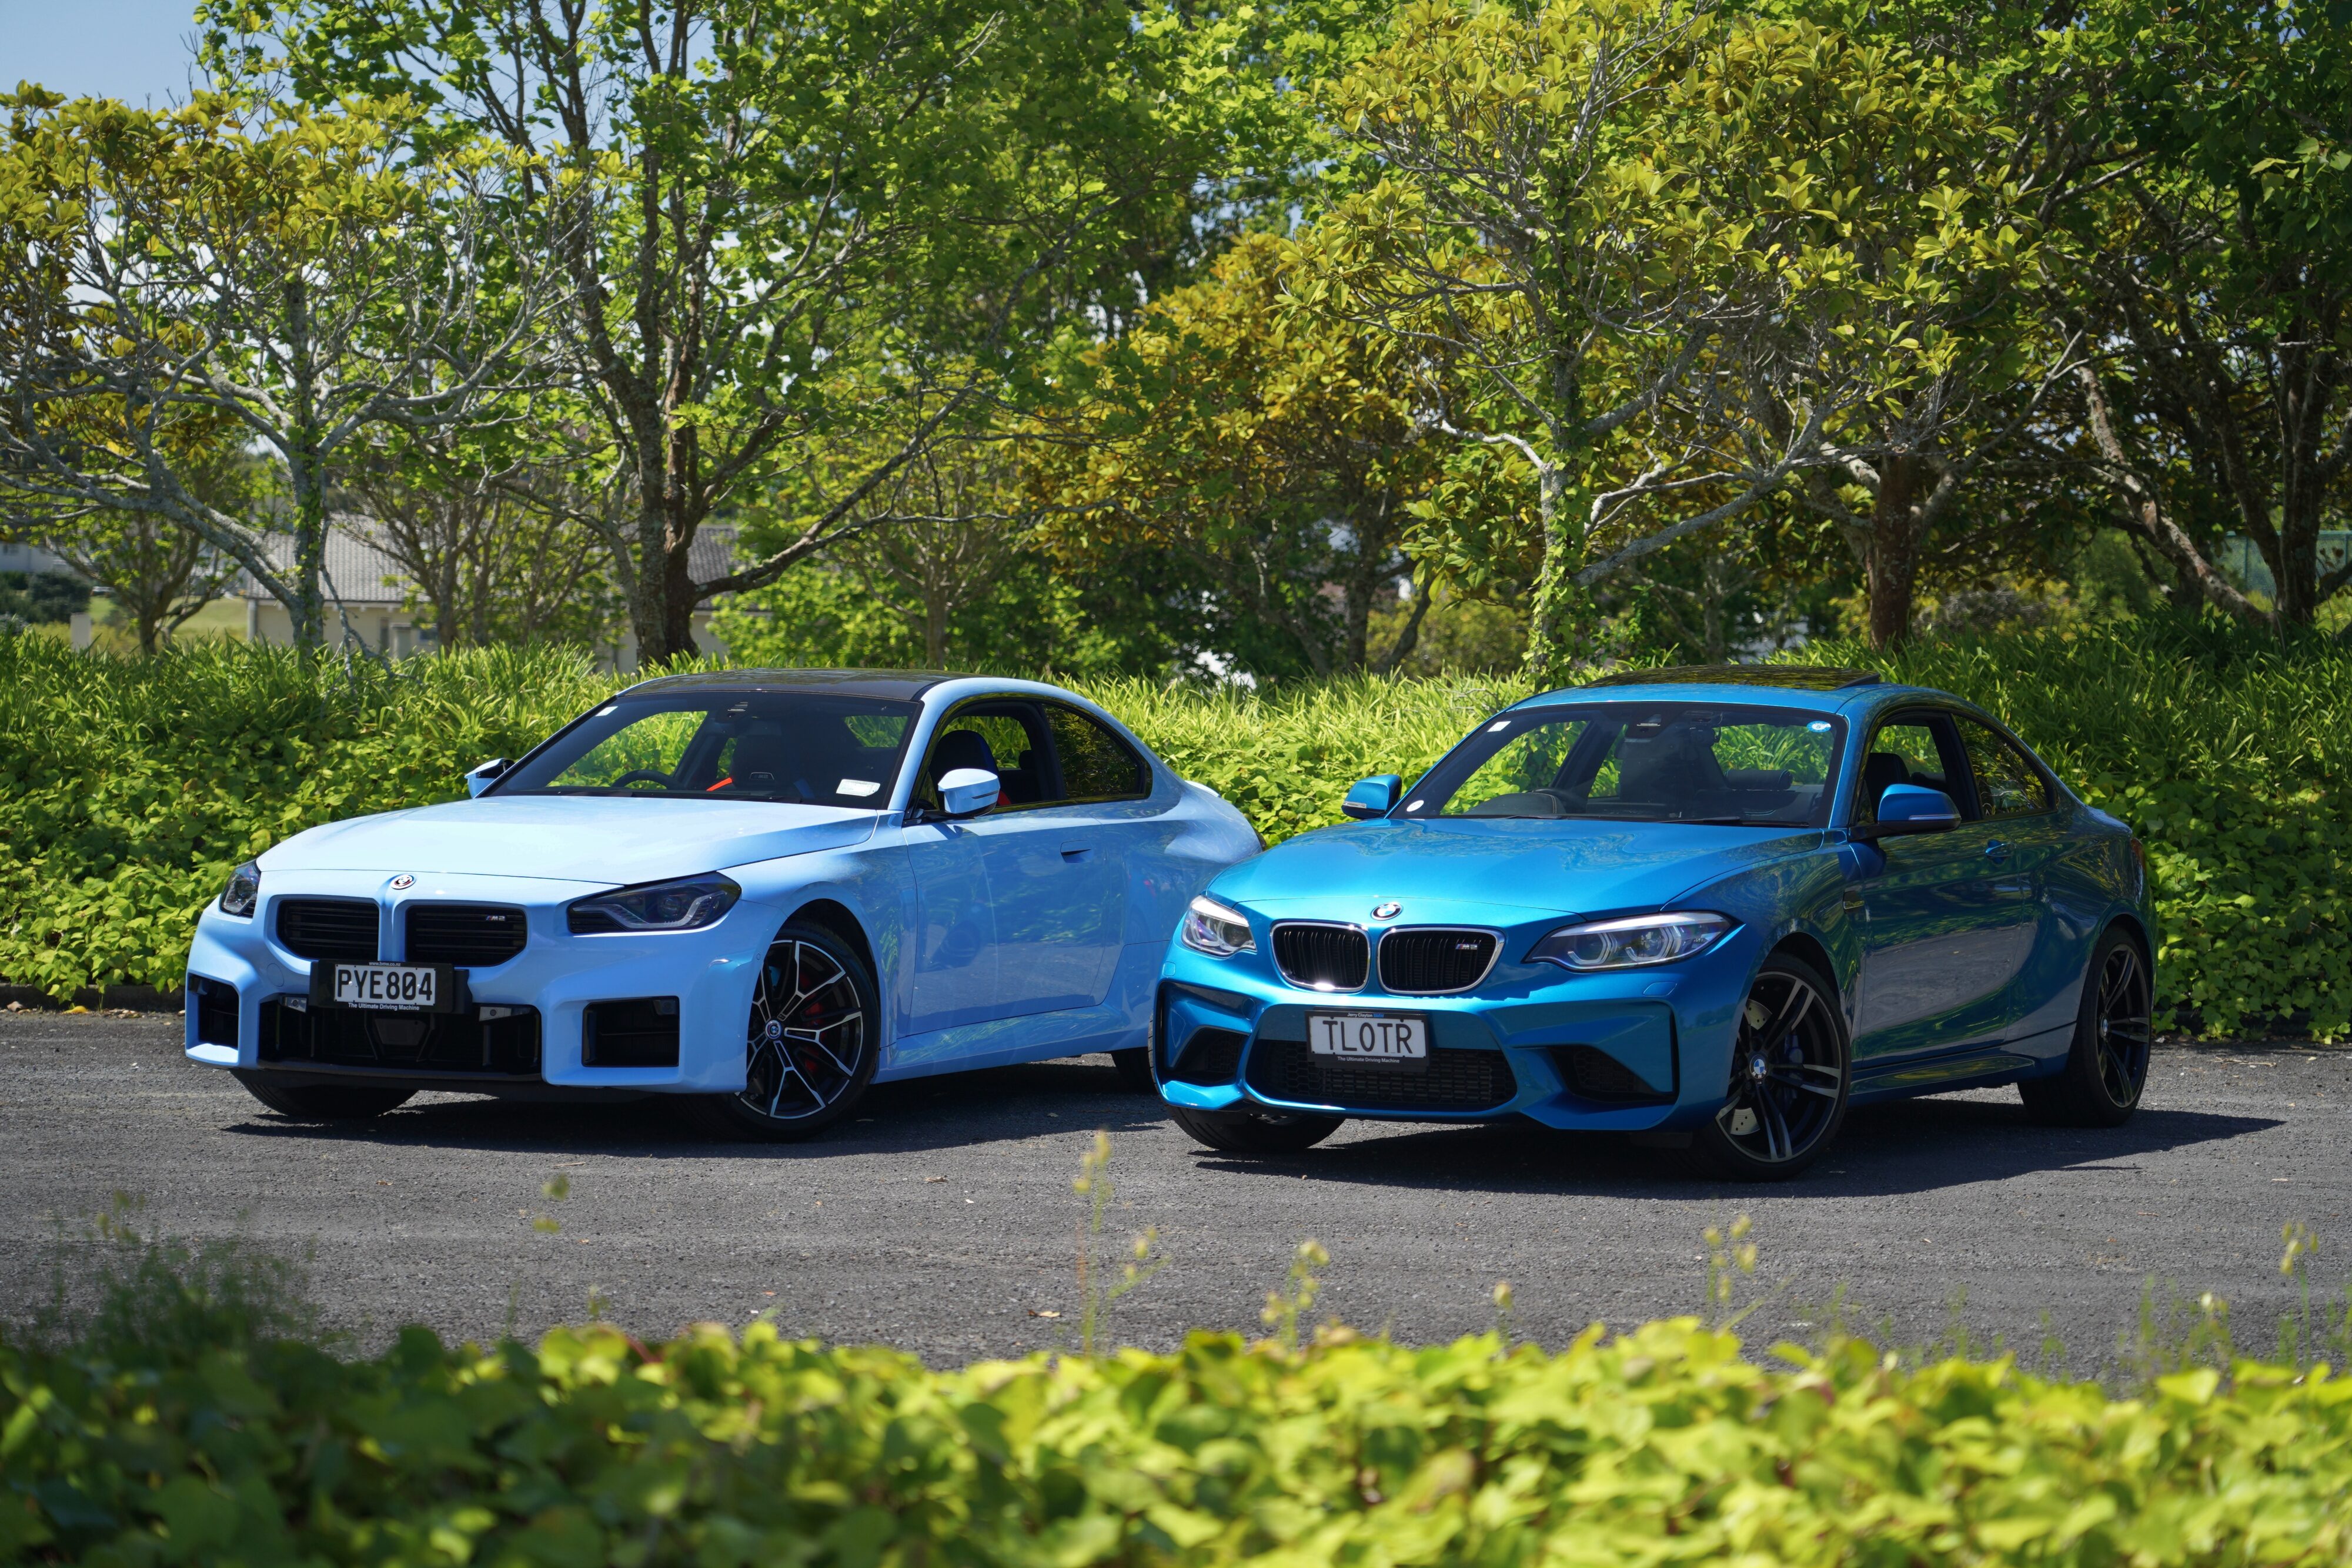 Dynamic Duel - The new BMW M2, feat. the OG M2